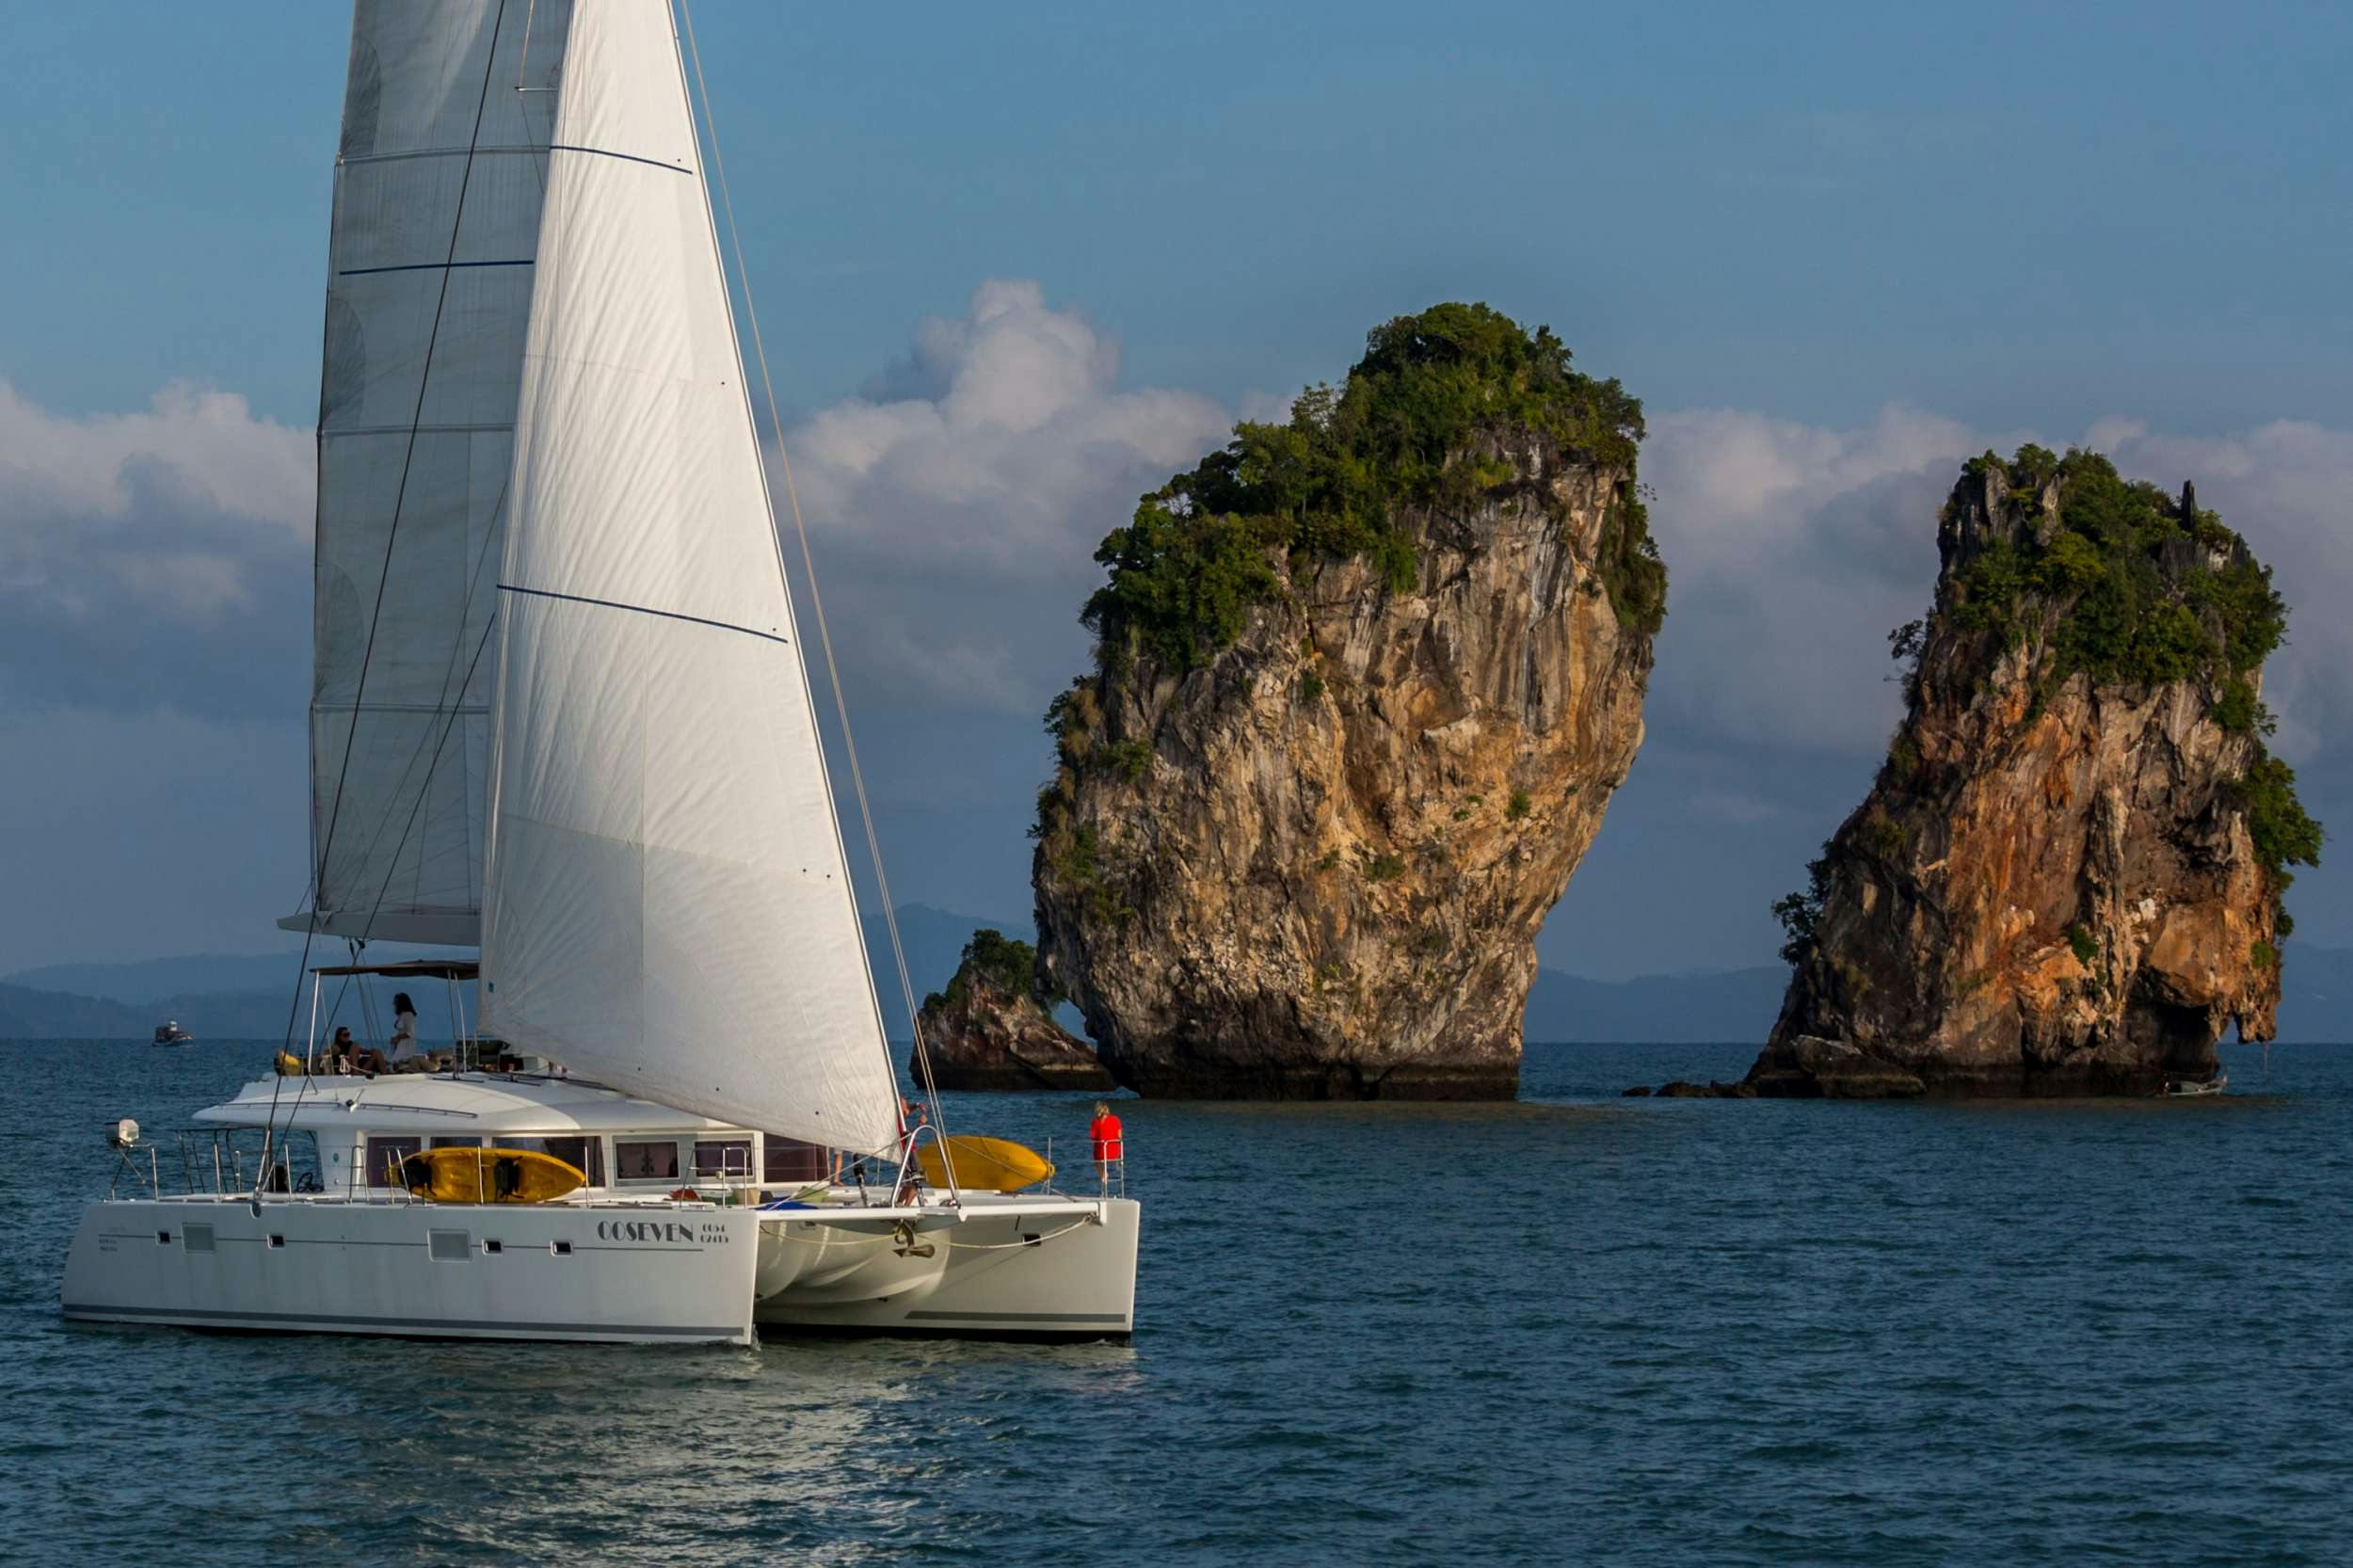 00SEVEN - Yacht Charter Thailand & Boat hire in SE Asia 1